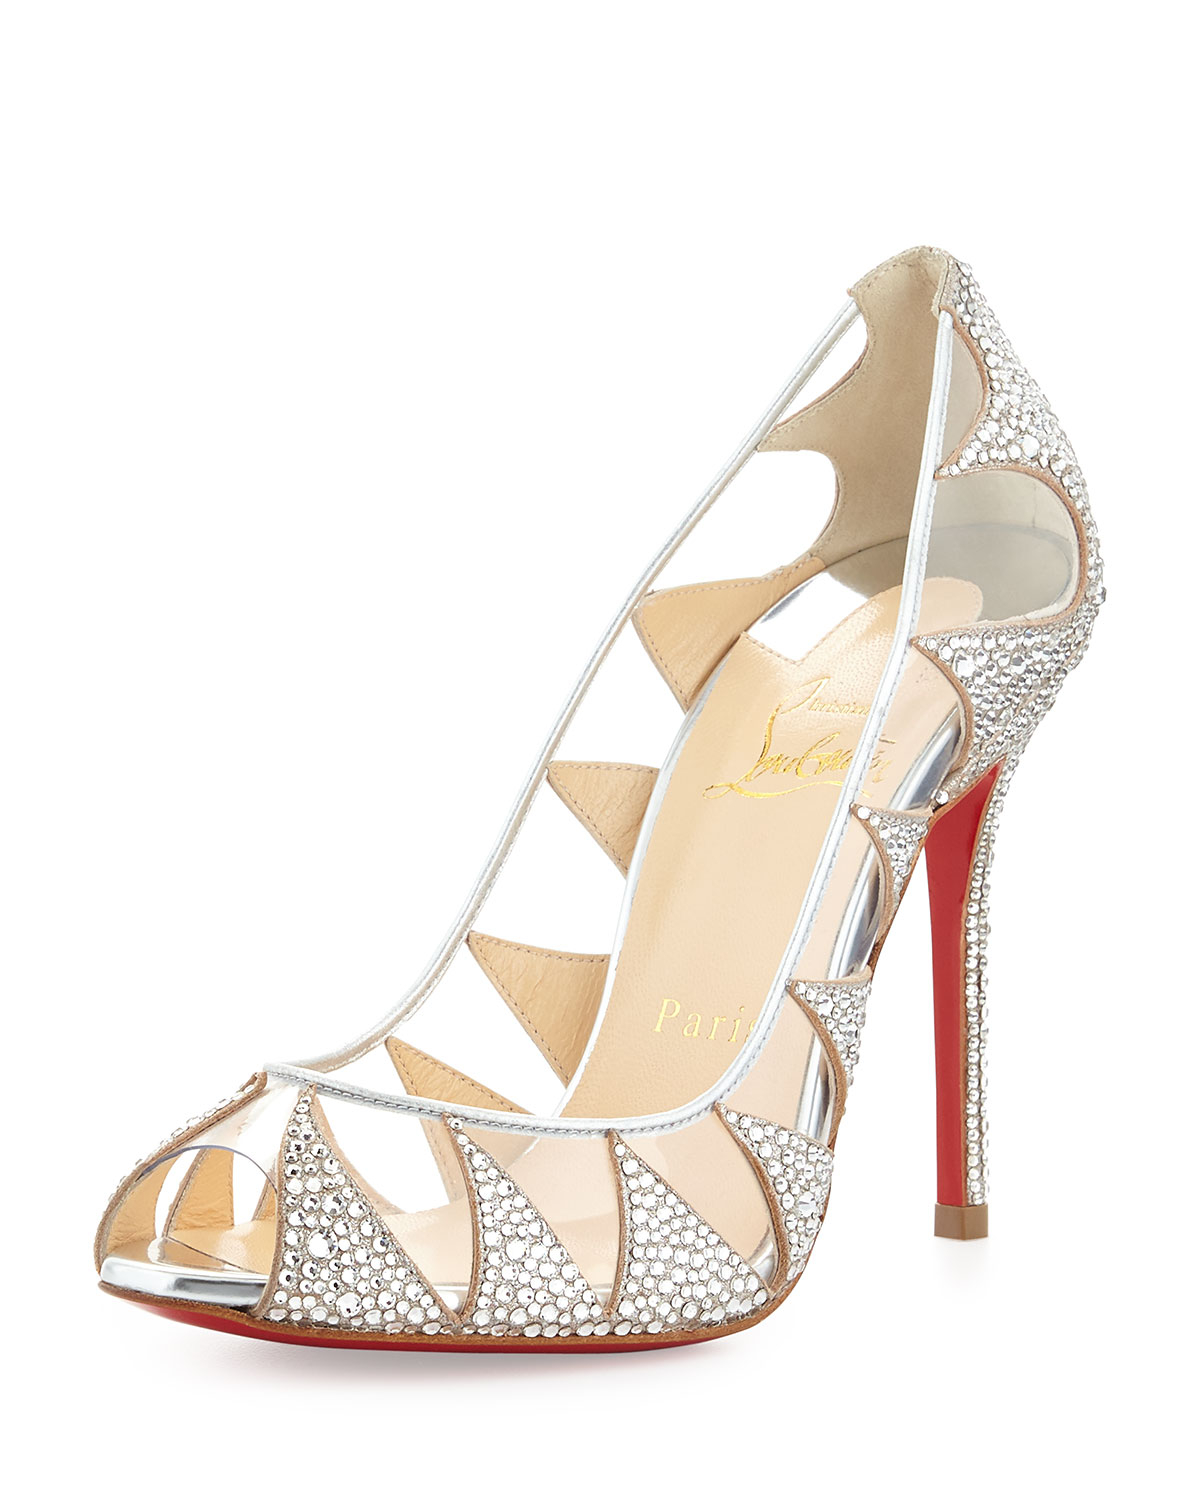 Christian louboutin Indera Crystal-Embellished Pumps in Silver | Lyst